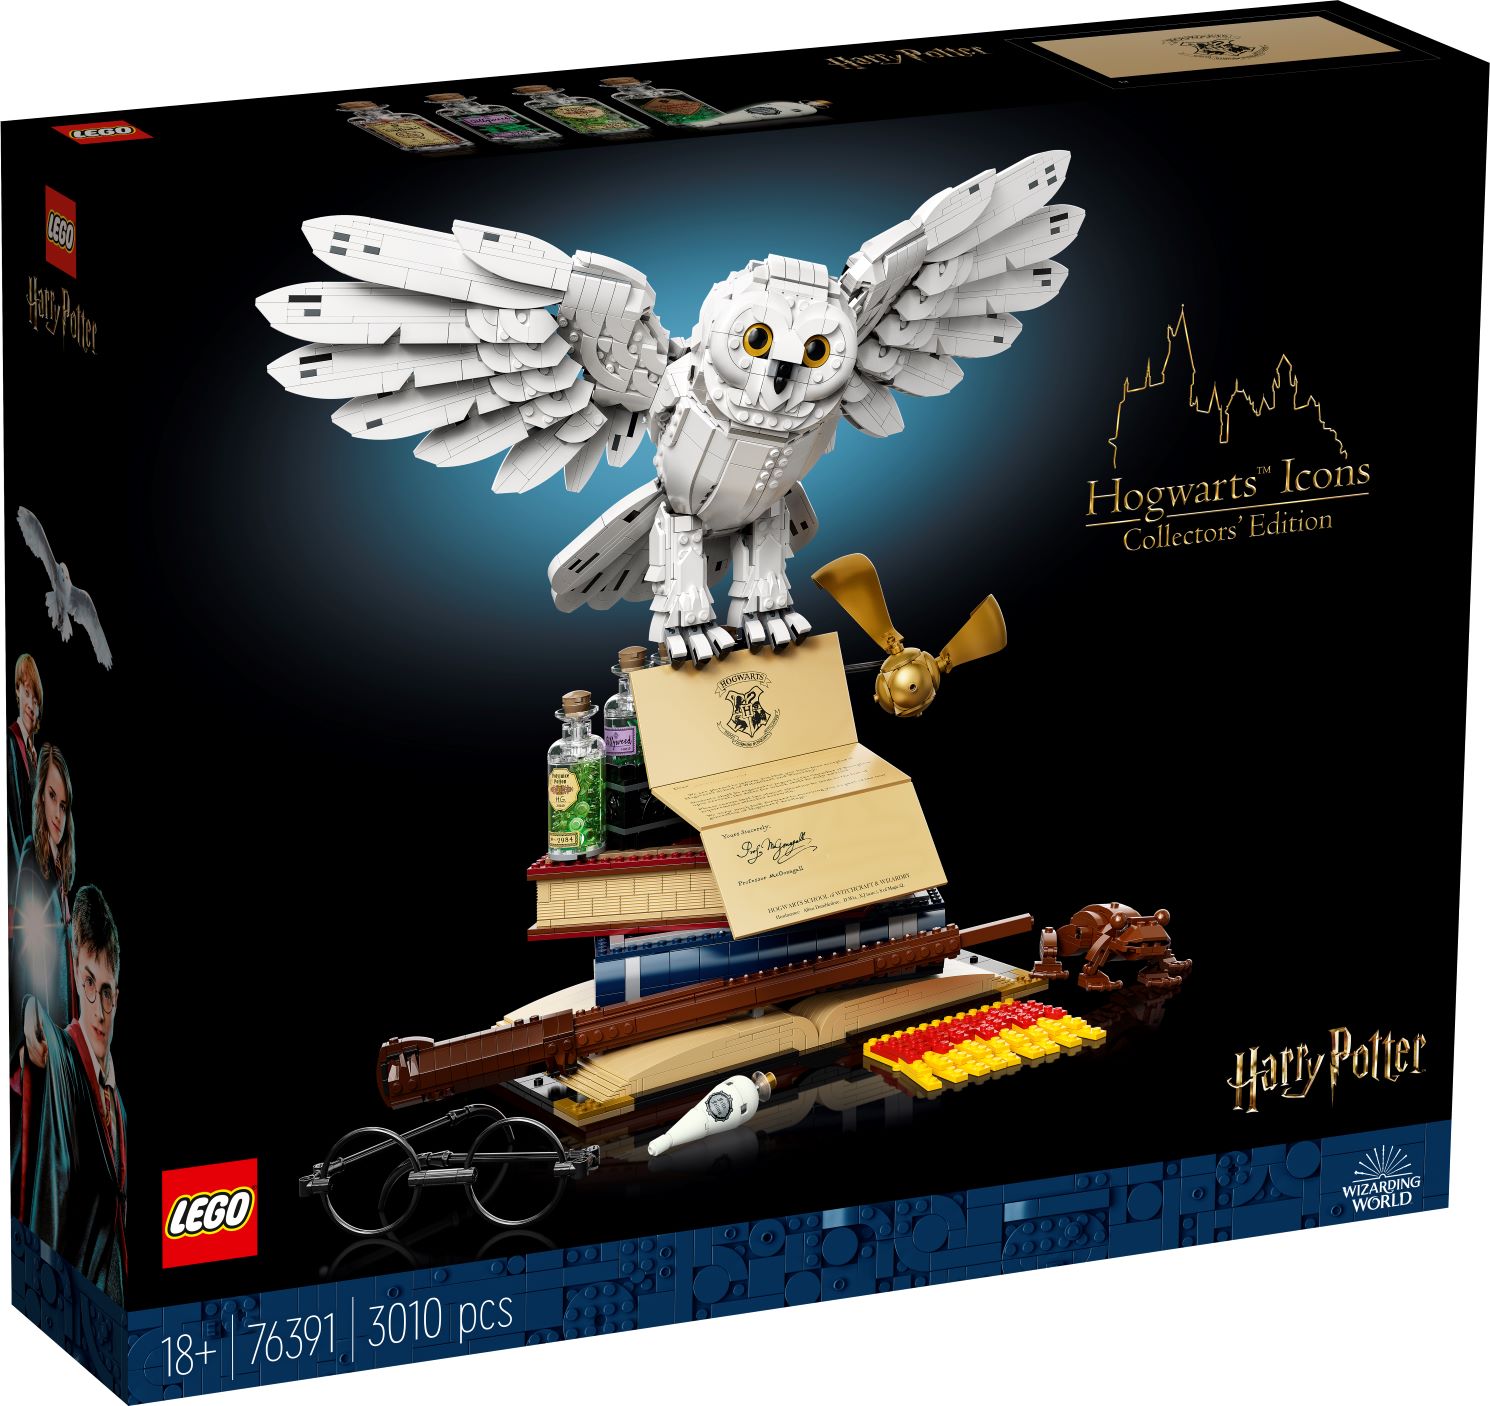 LEGO celebrates 20 years of Harry Potter with a new collectors' edition